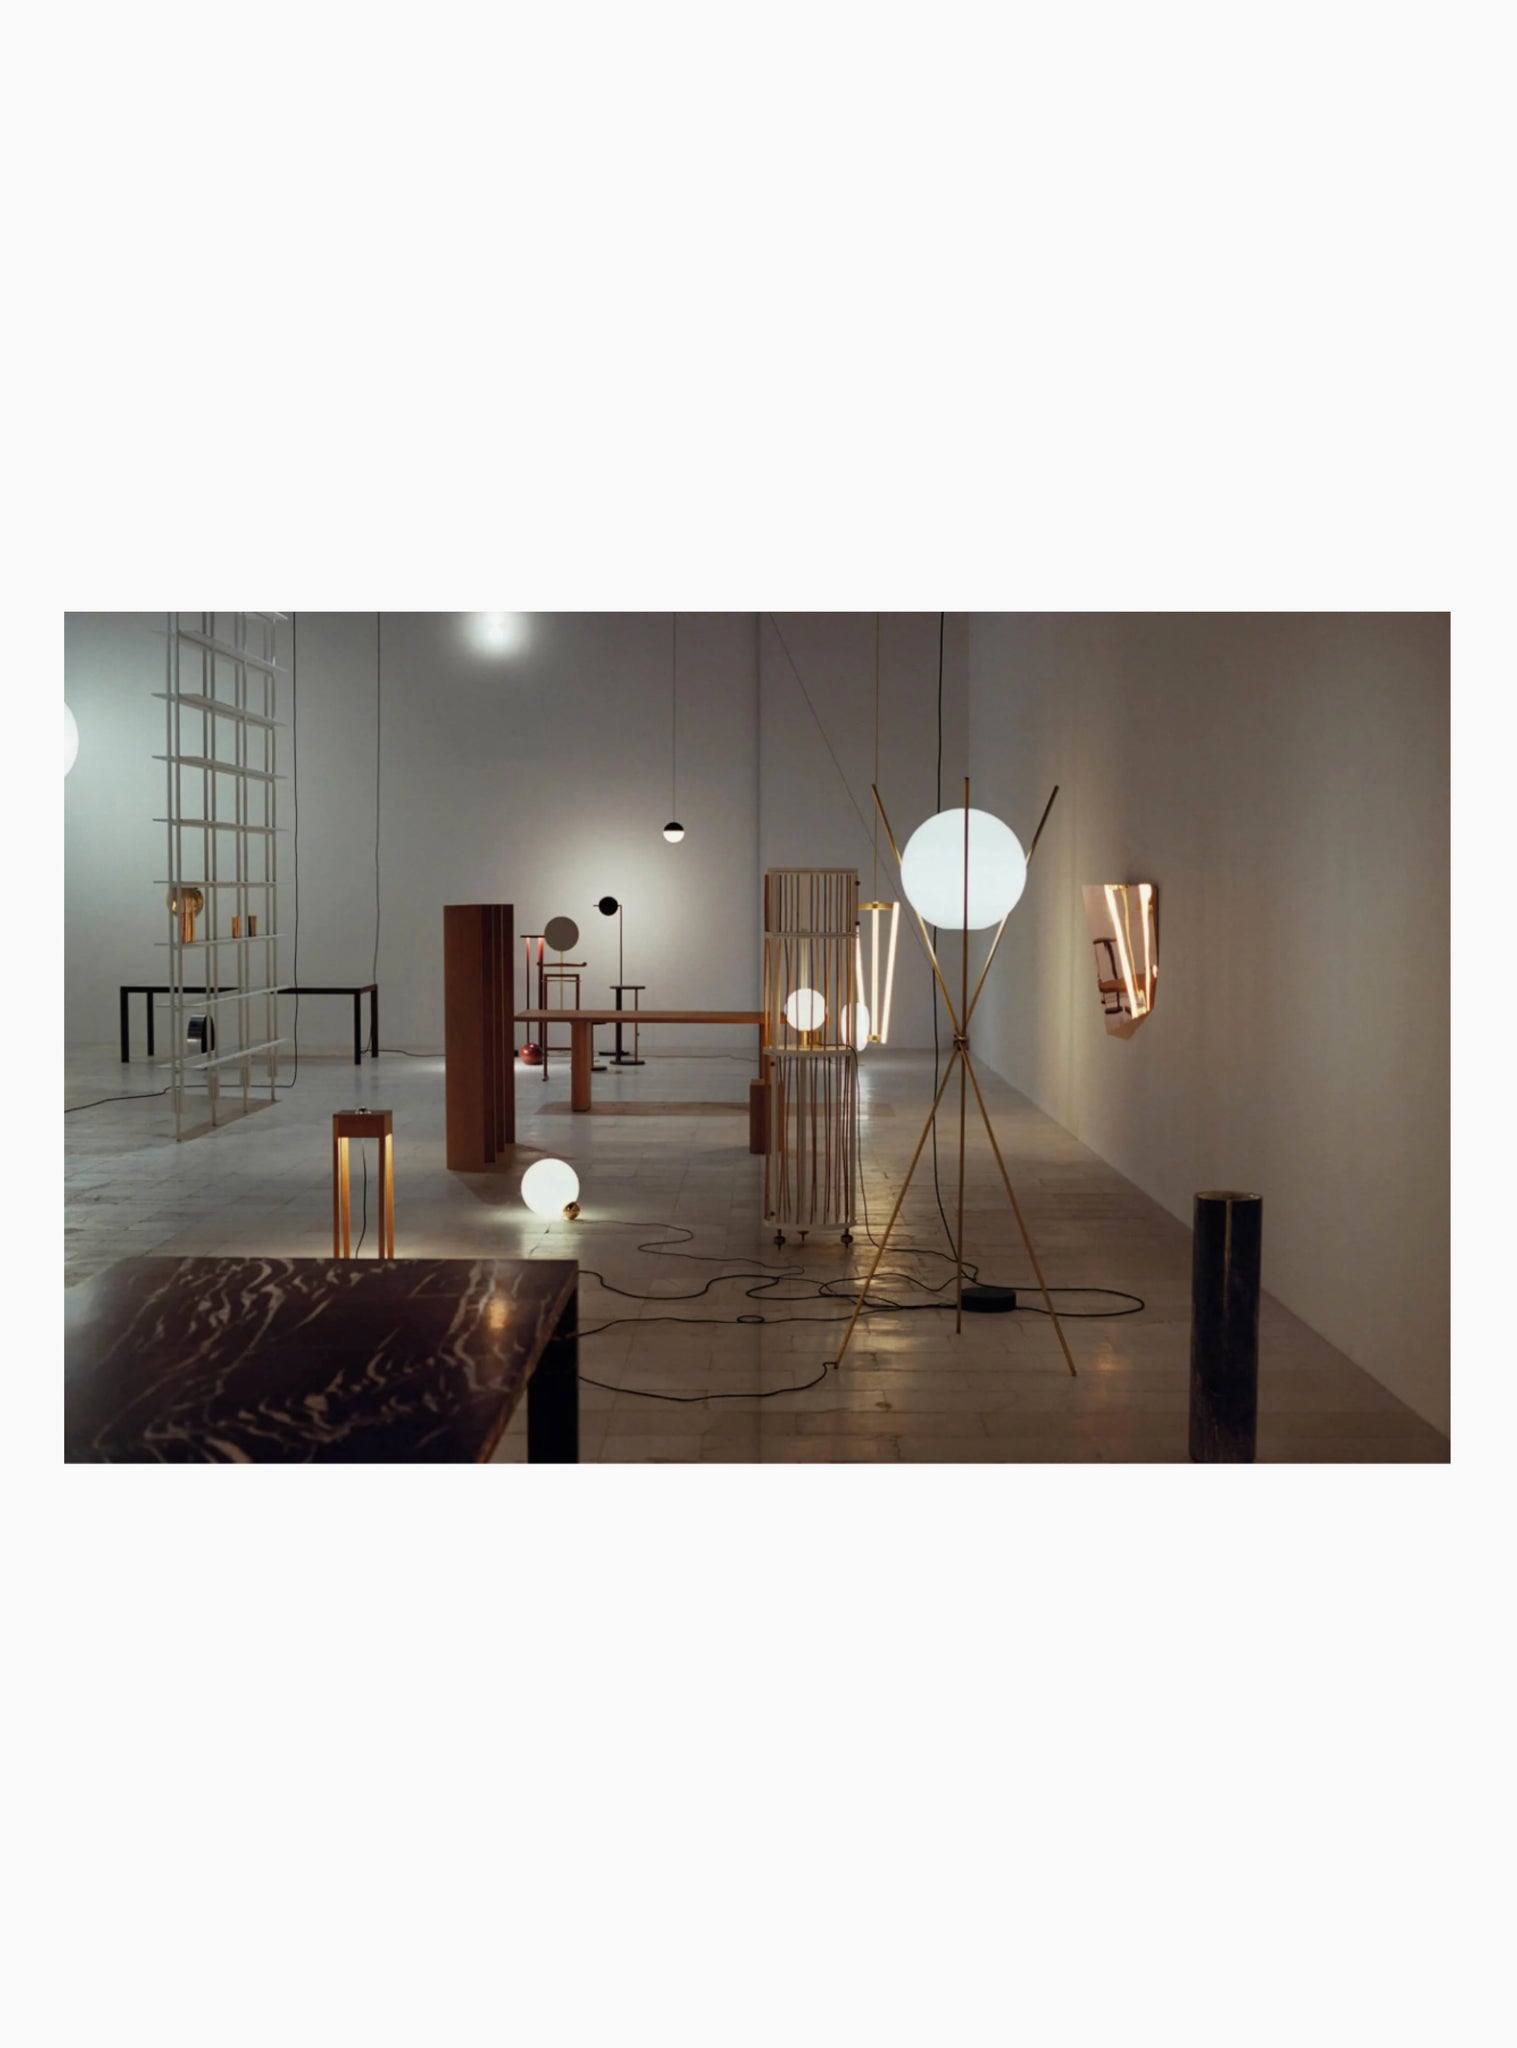 Things that Go Together, Michael Anastassiades